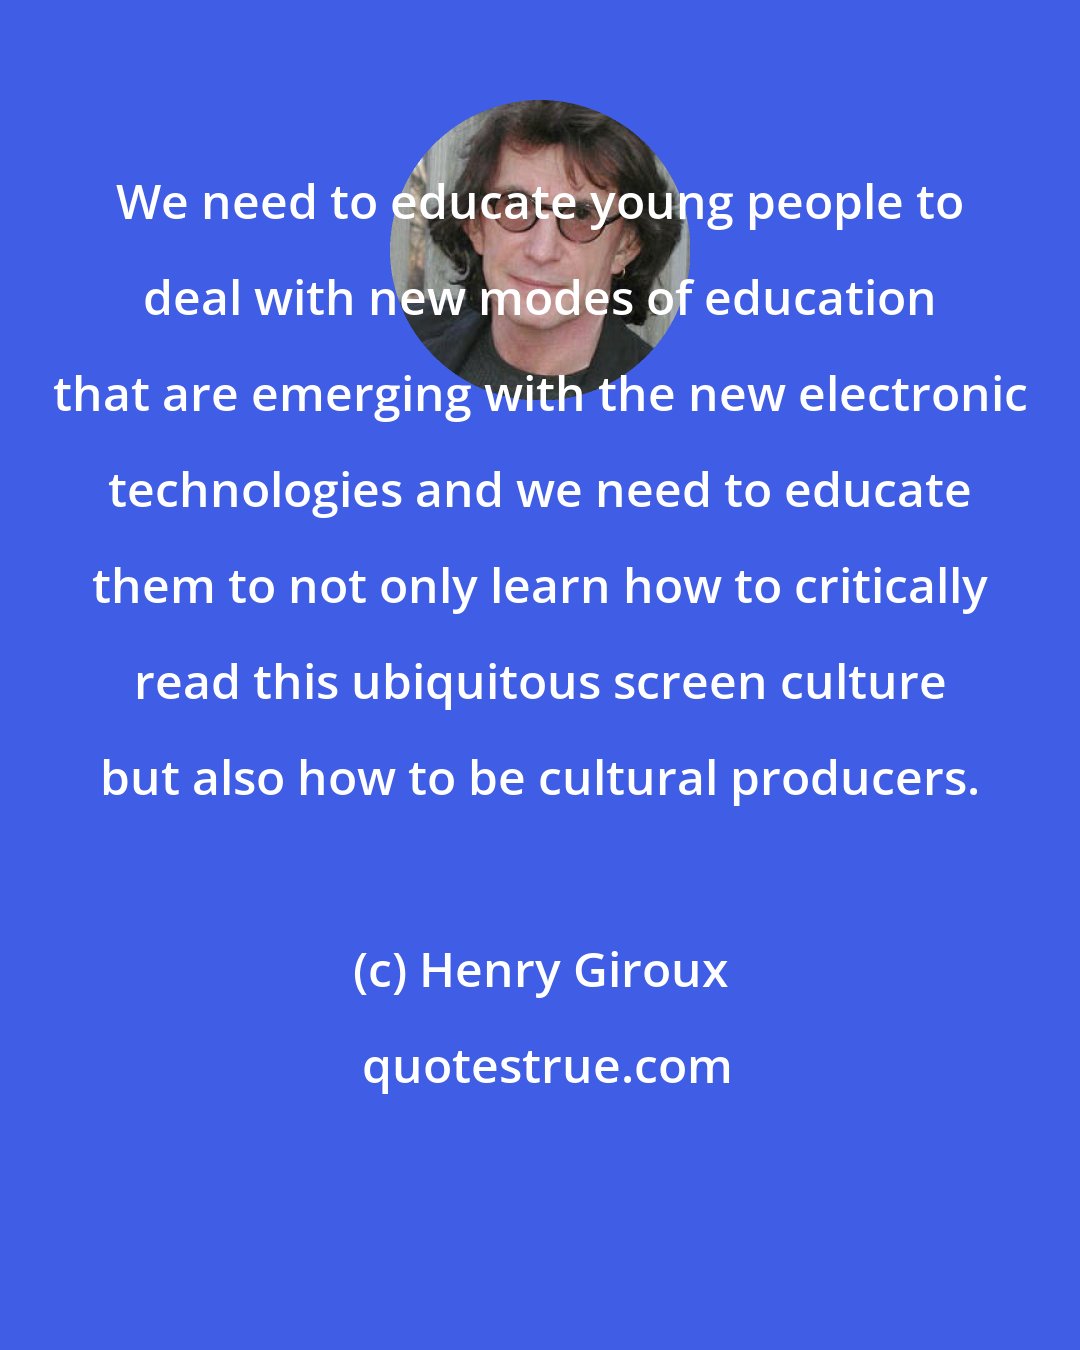 Henry Giroux: We need to educate young people to deal with new modes of education that are emerging with the new electronic technologies and we need to educate them to not only learn how to critically read this ubiquitous screen culture but also how to be cultural producers.